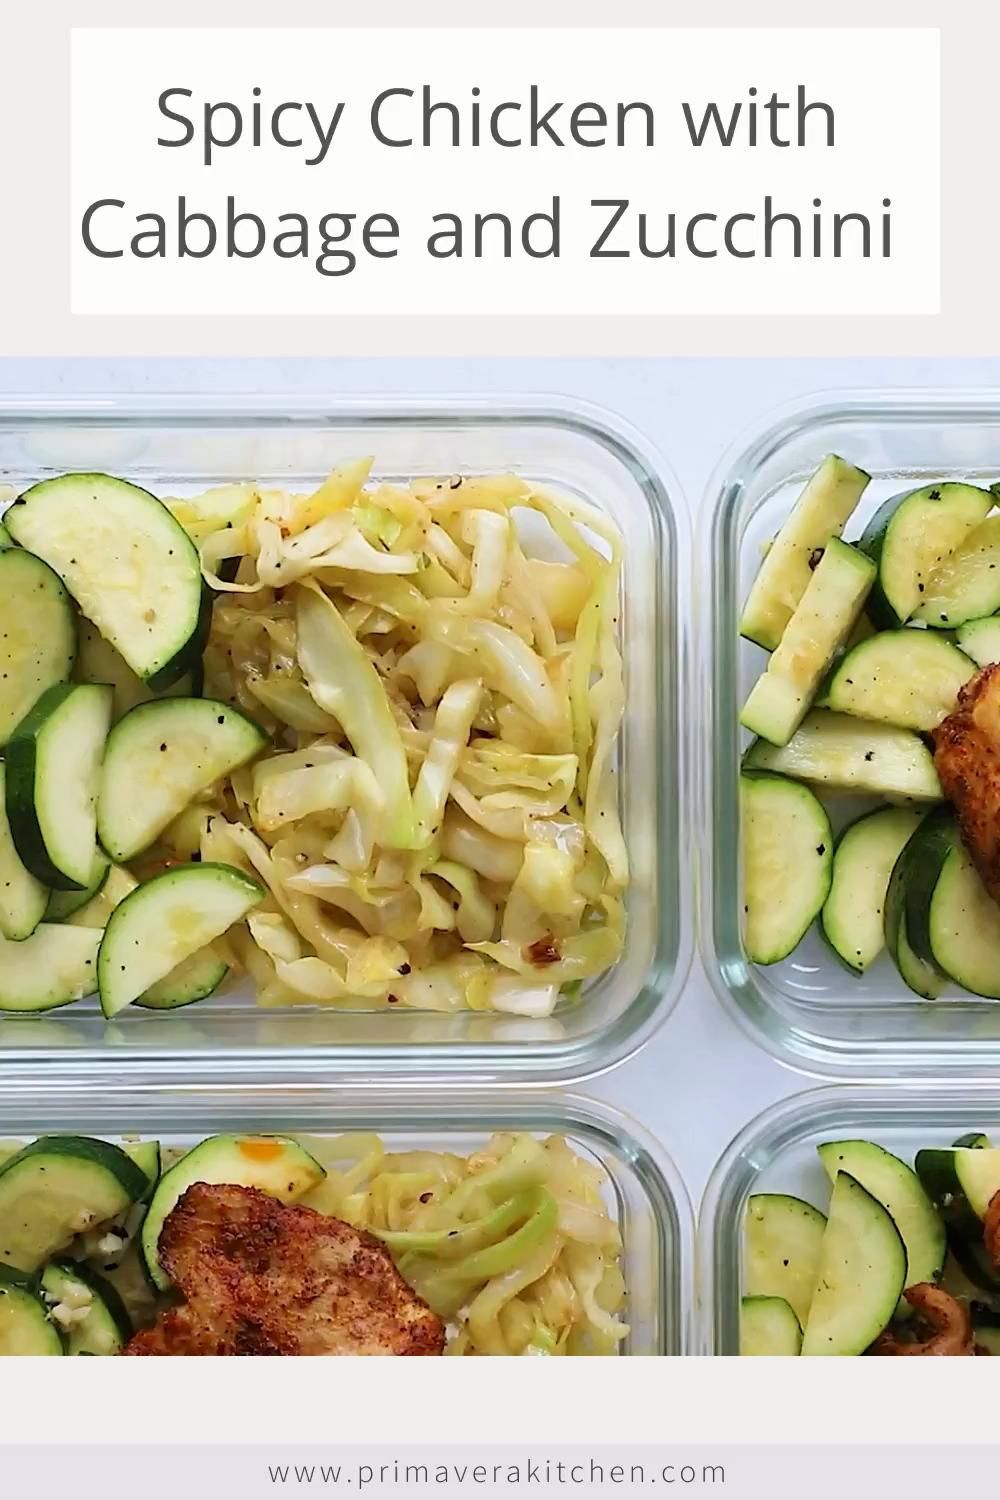 Spicy Chicken with Sauteed Cabbage and Zucchini Bowls - Spicy Chicken with Sauteed Cabbage and Zucchini Bowls -   19 meal prep recipes for beginners simple ideas